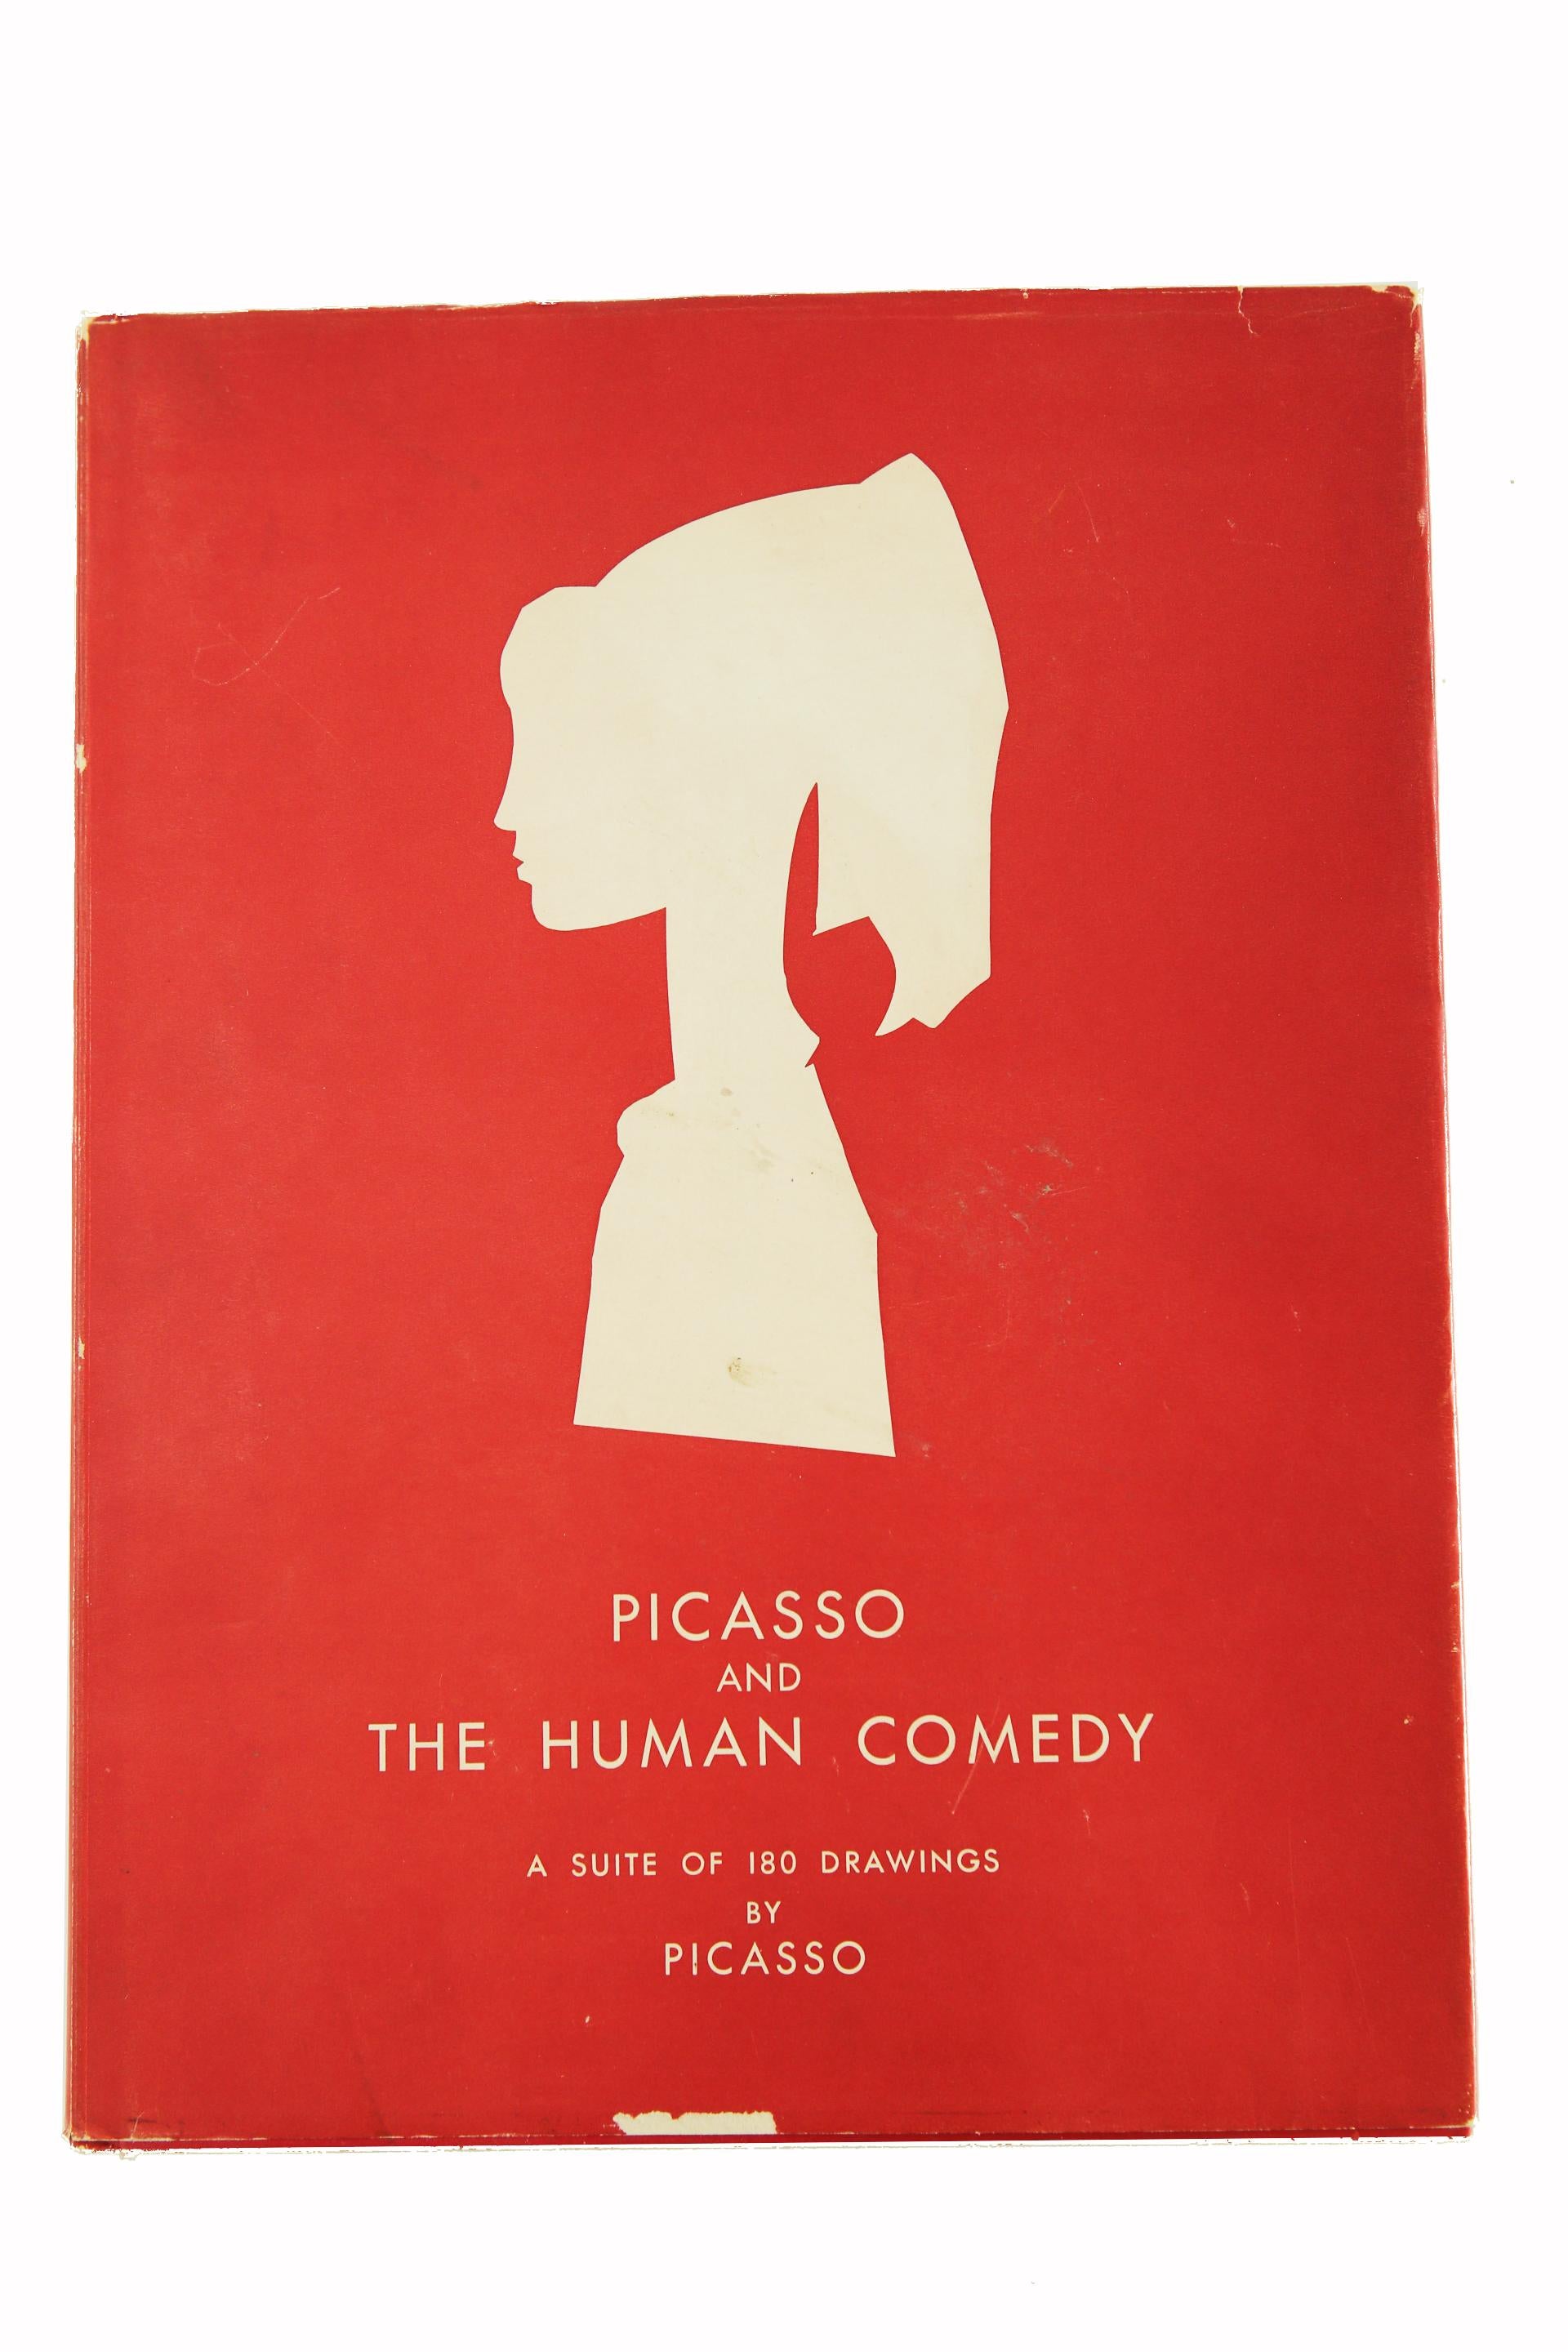 Picasso and the Human Comedy.  A Suite of 180 Drawings by Picasso. (Verve 29-30) - Art by (after) Pablo Picasso